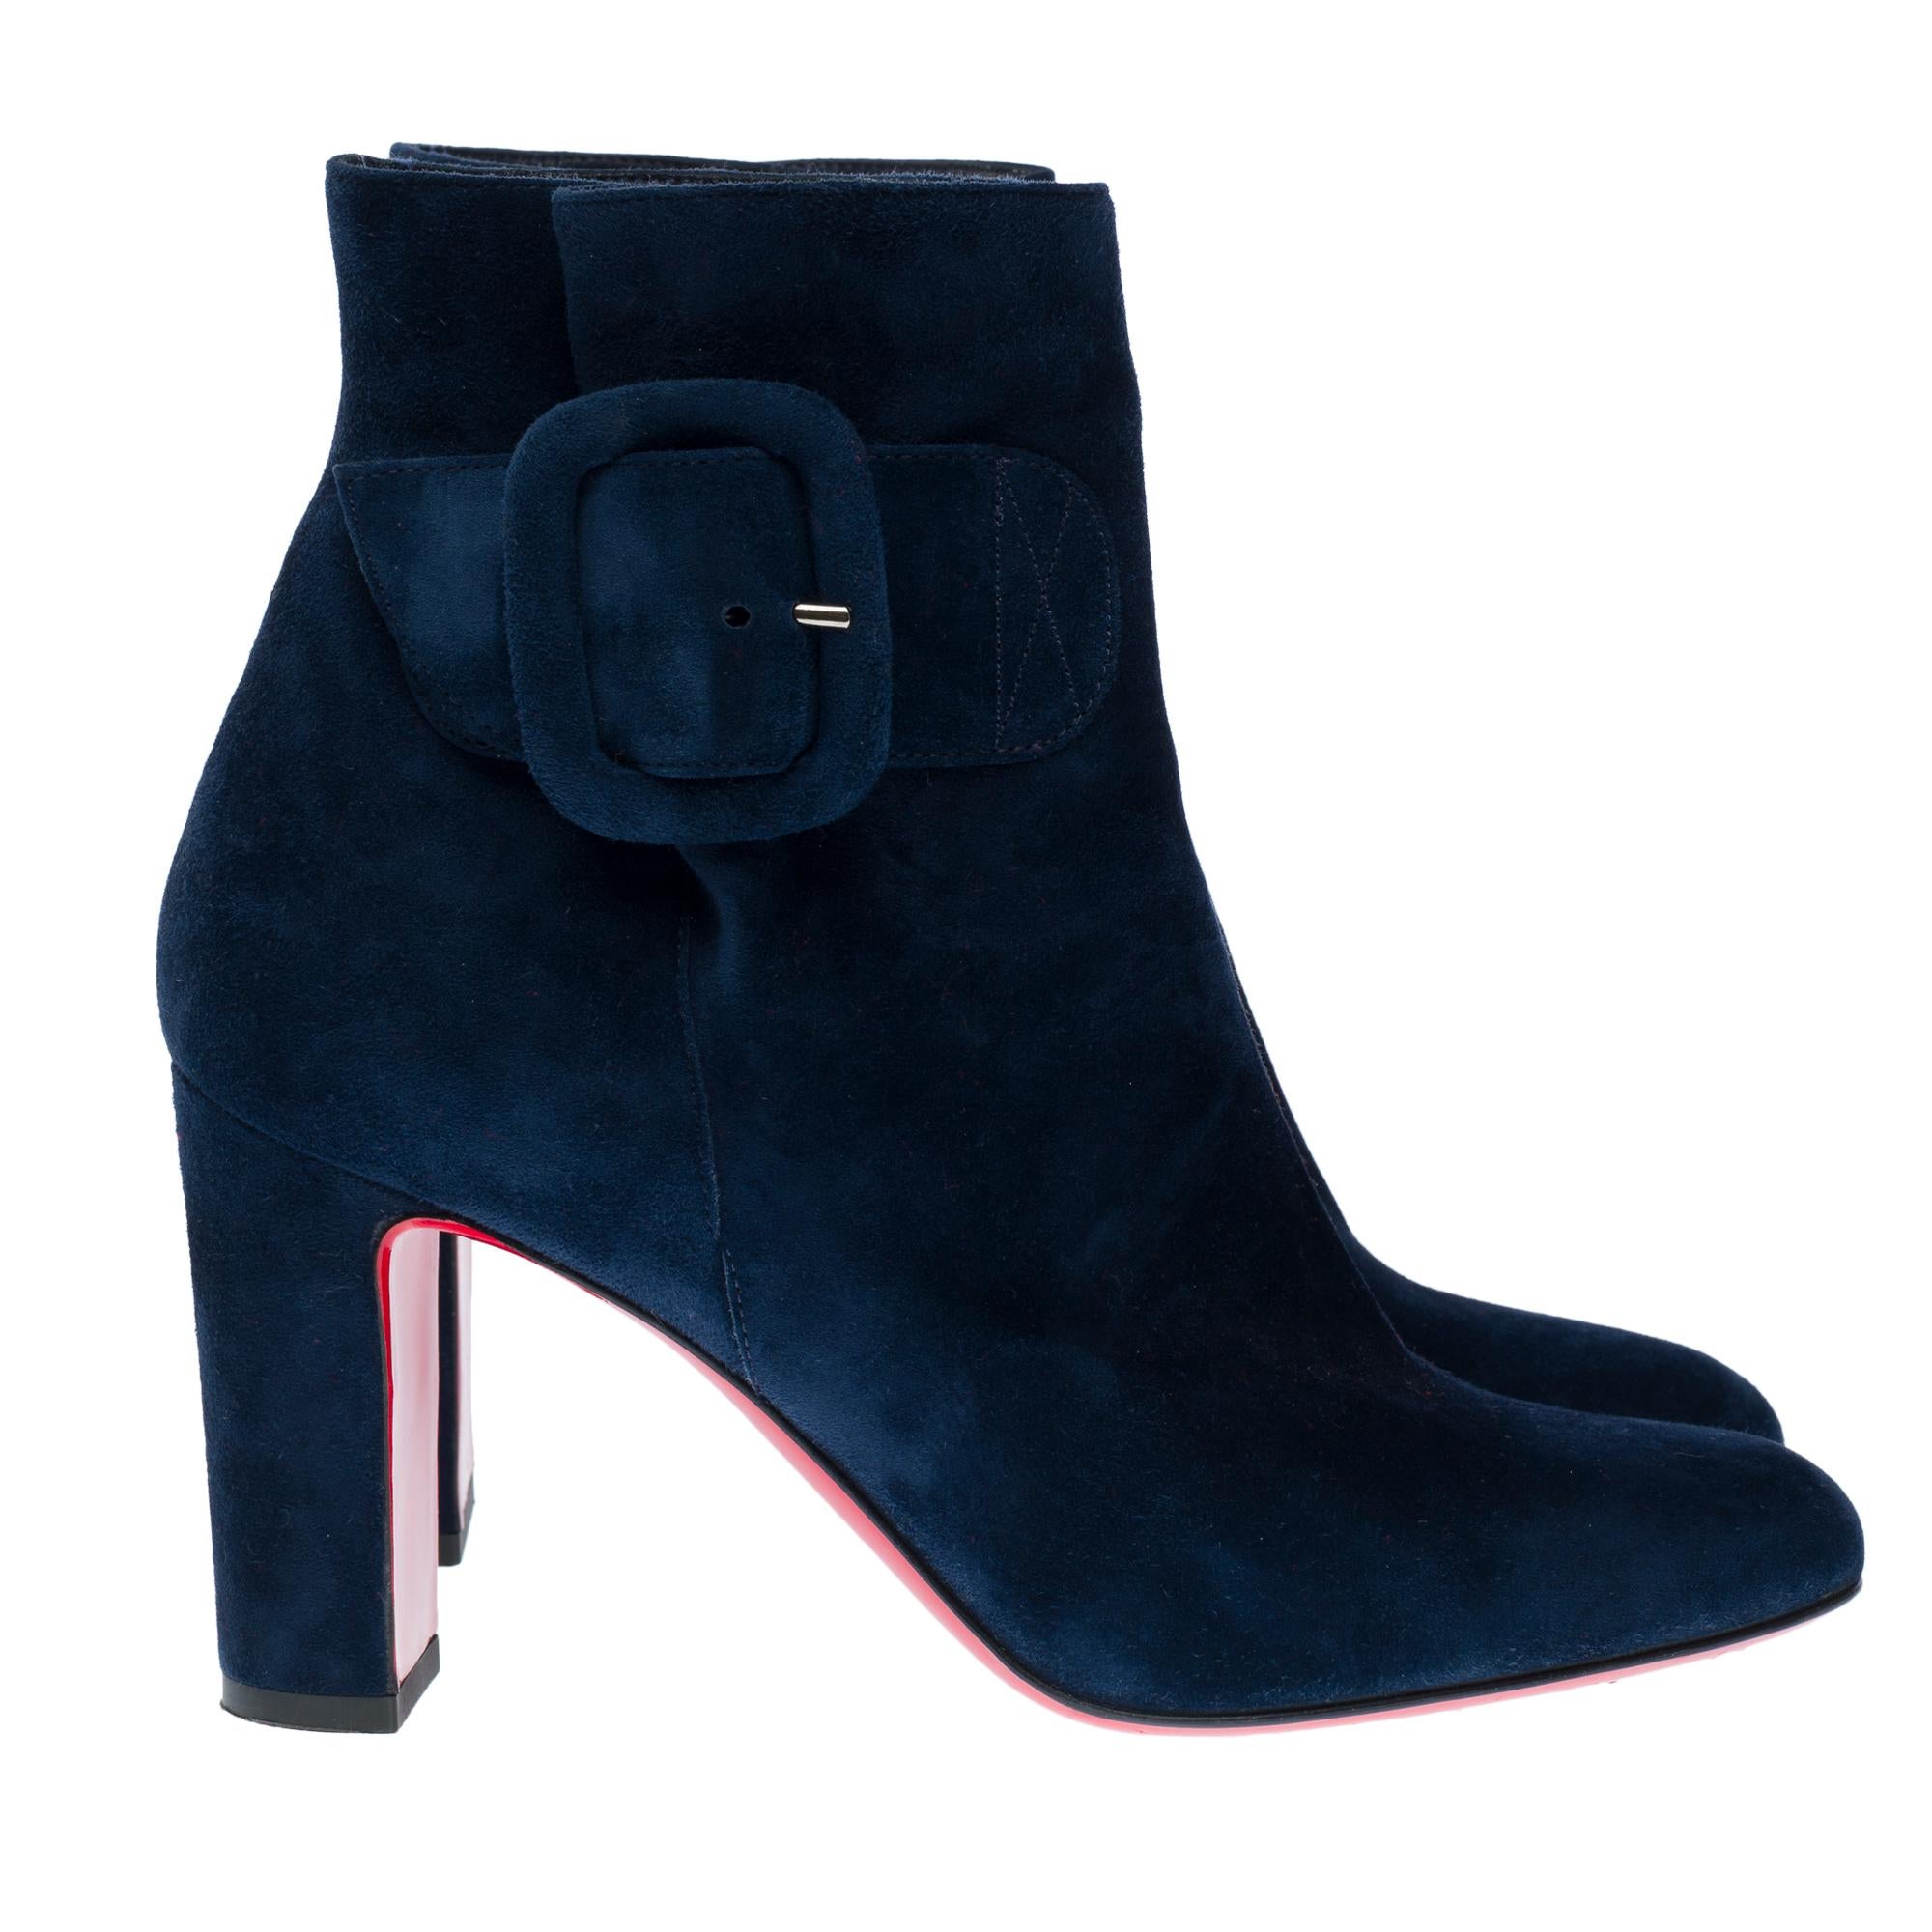 Christian Louboutin ankleboot in blue suede, size 37 For Sale 2